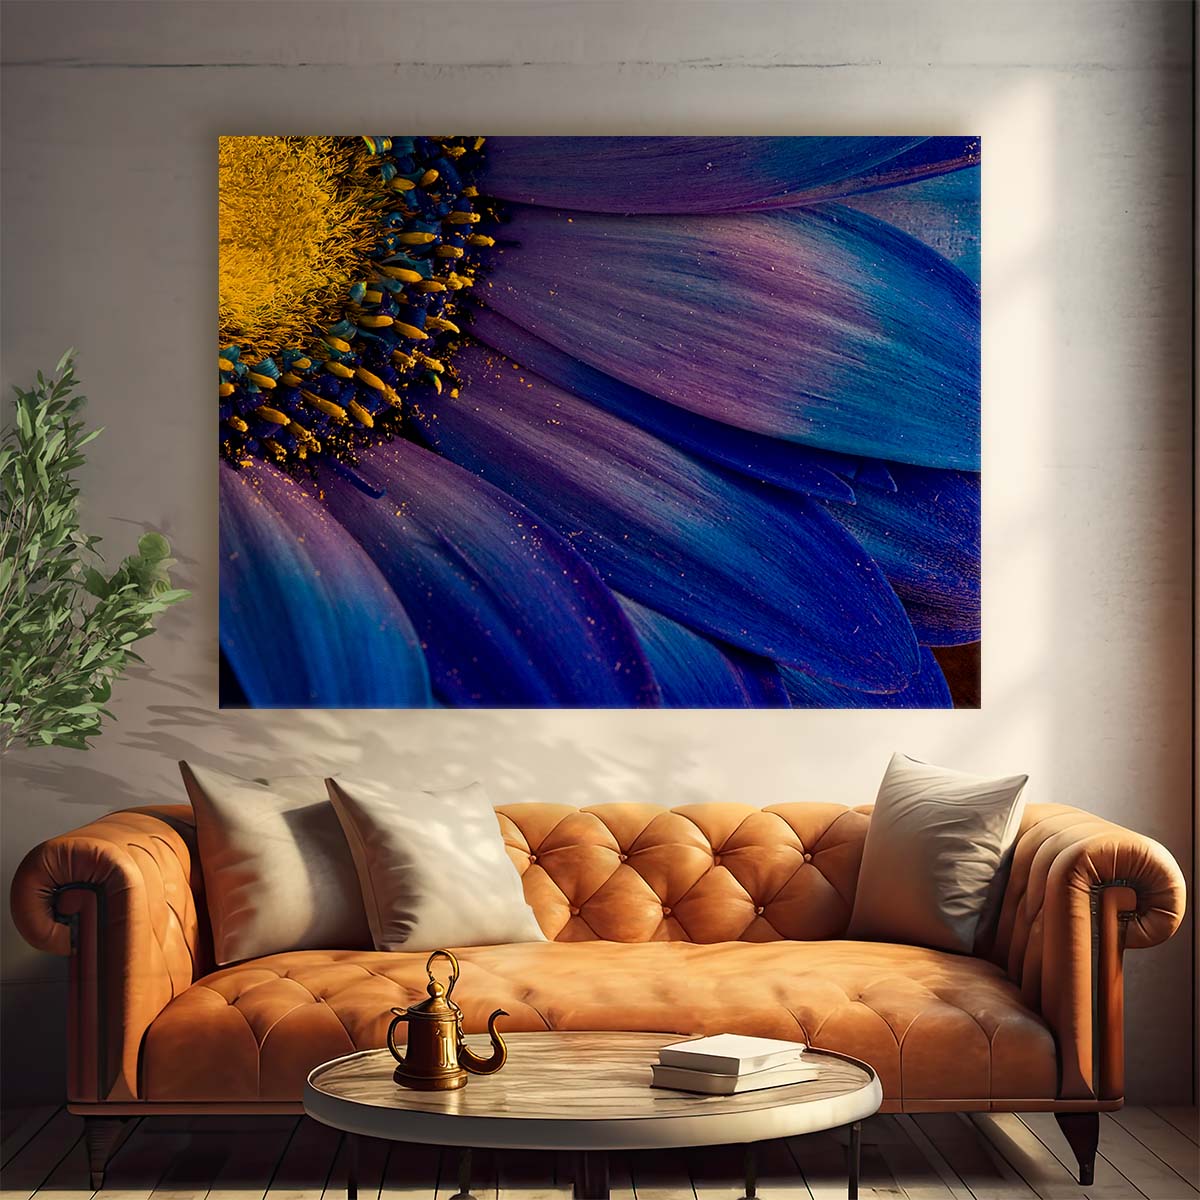 Stunning Icelandic Purple Daisy Macro Floral Wall Art by Luxuriance Designs. Made in USA.